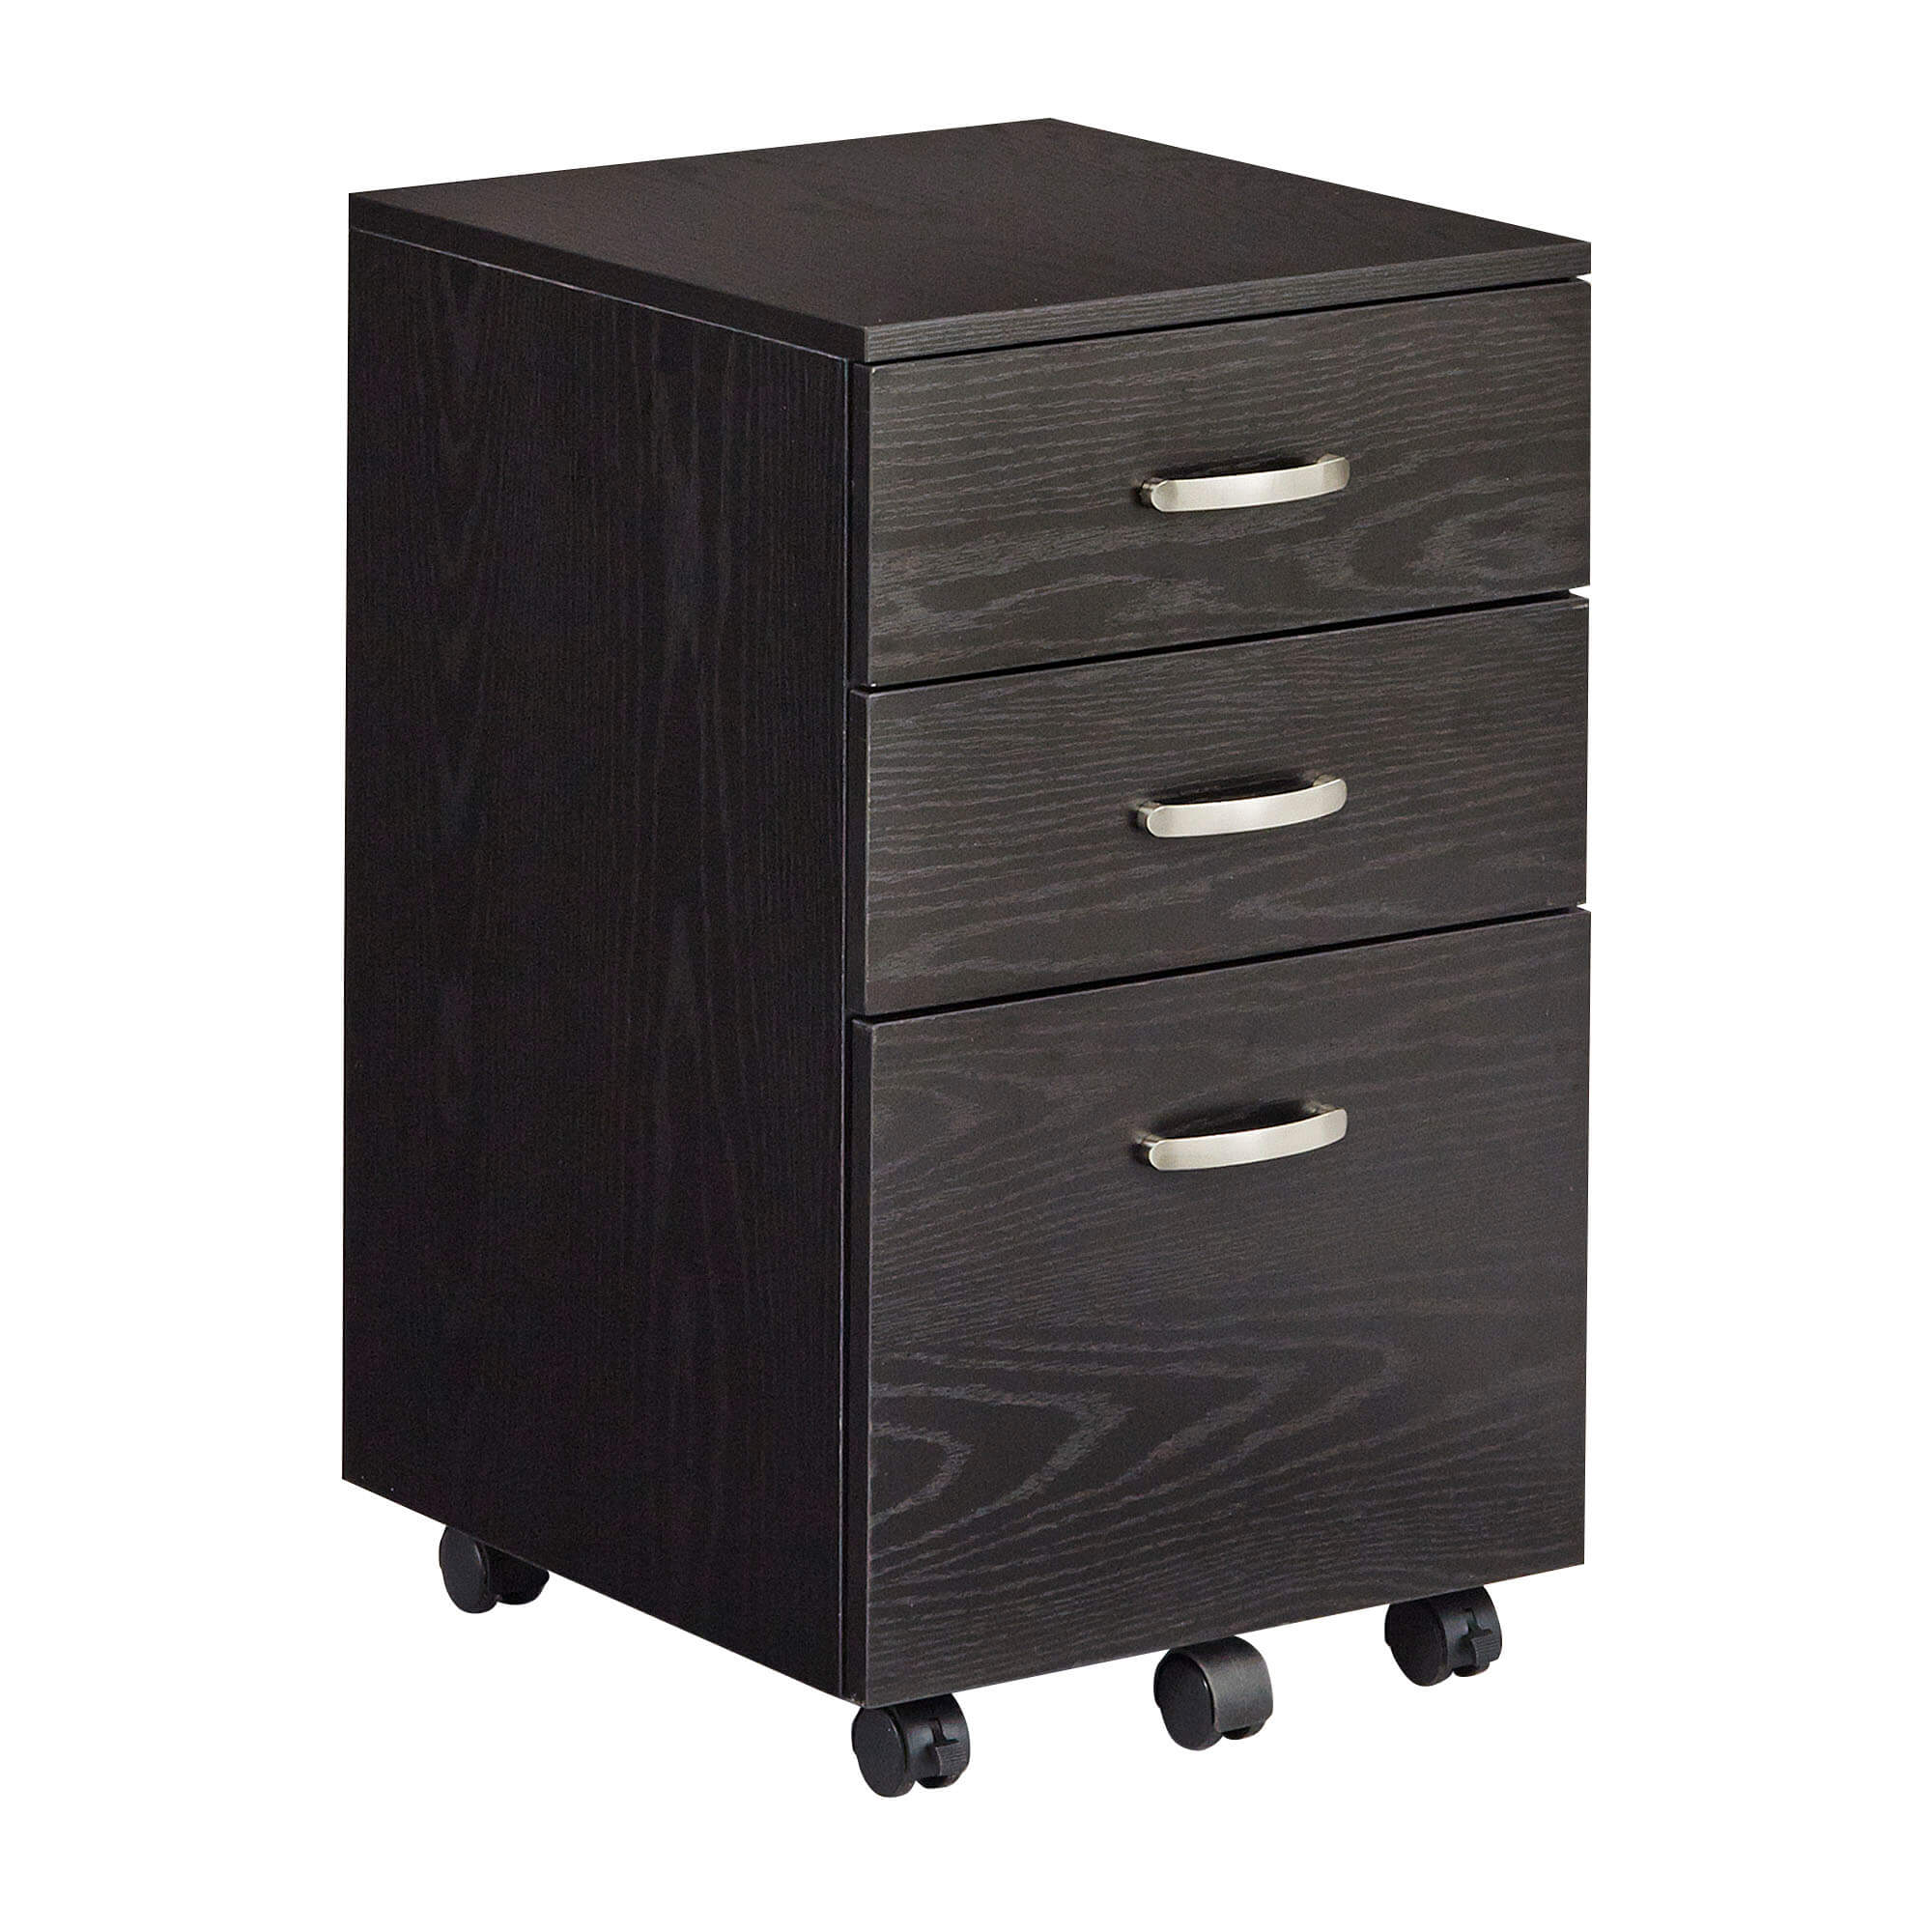 Home office ideas home office storage cabinets 1 2